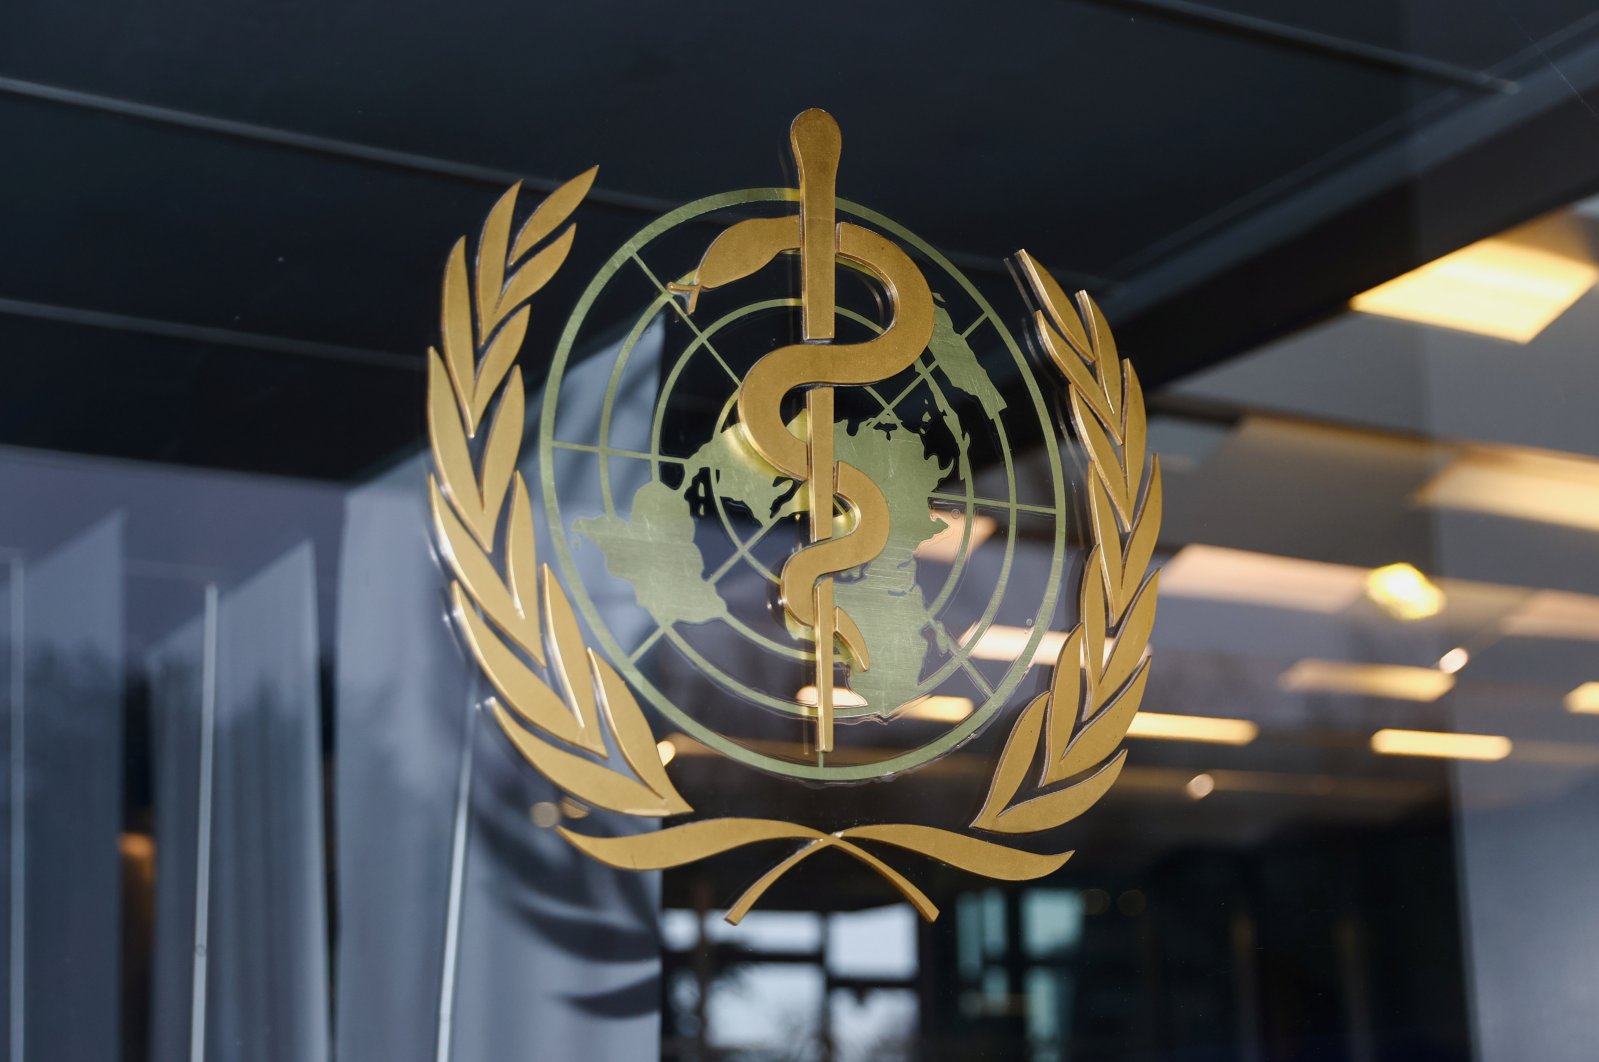 The World Health Organization logo is pictured at the entrance of the WHO building, in Geneva, Switzerland, Dec. 20, 2021. (Reuters Photo)